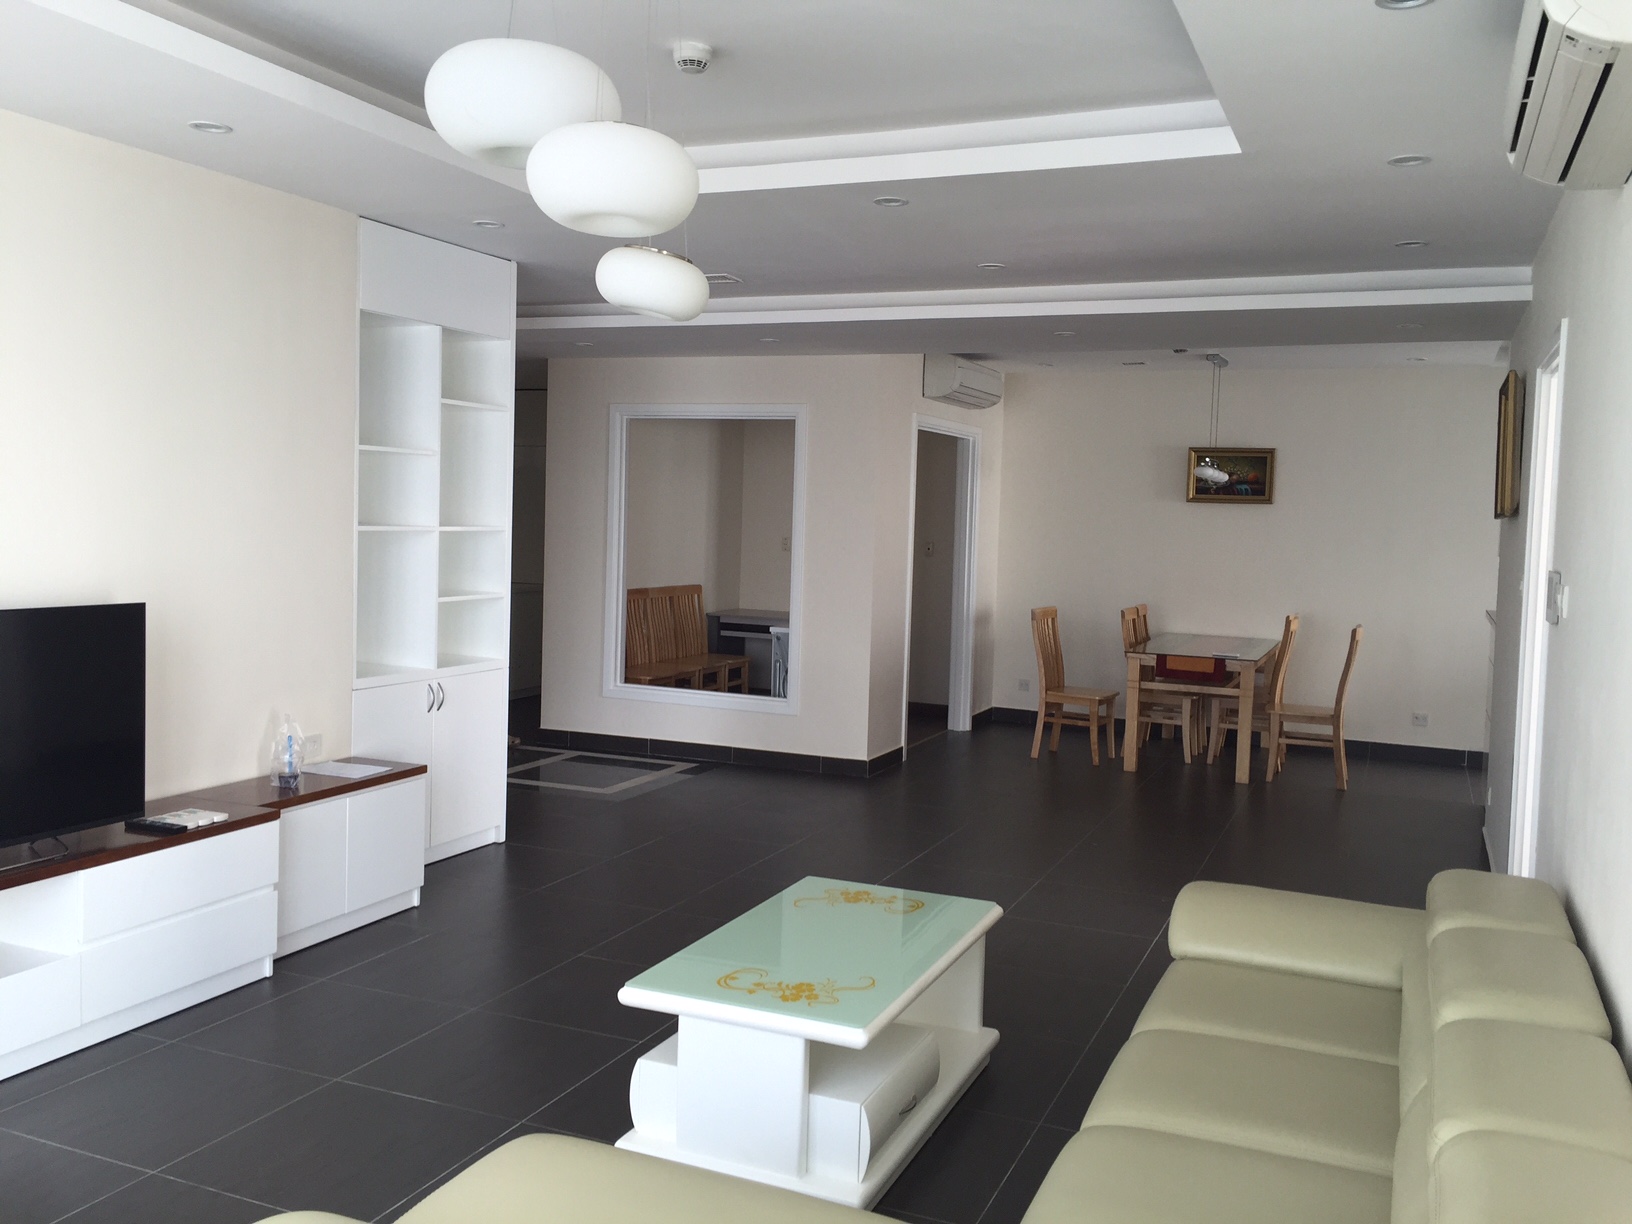 3 bedroom apartment for rent with modern and new furniture at Thang Long Number one